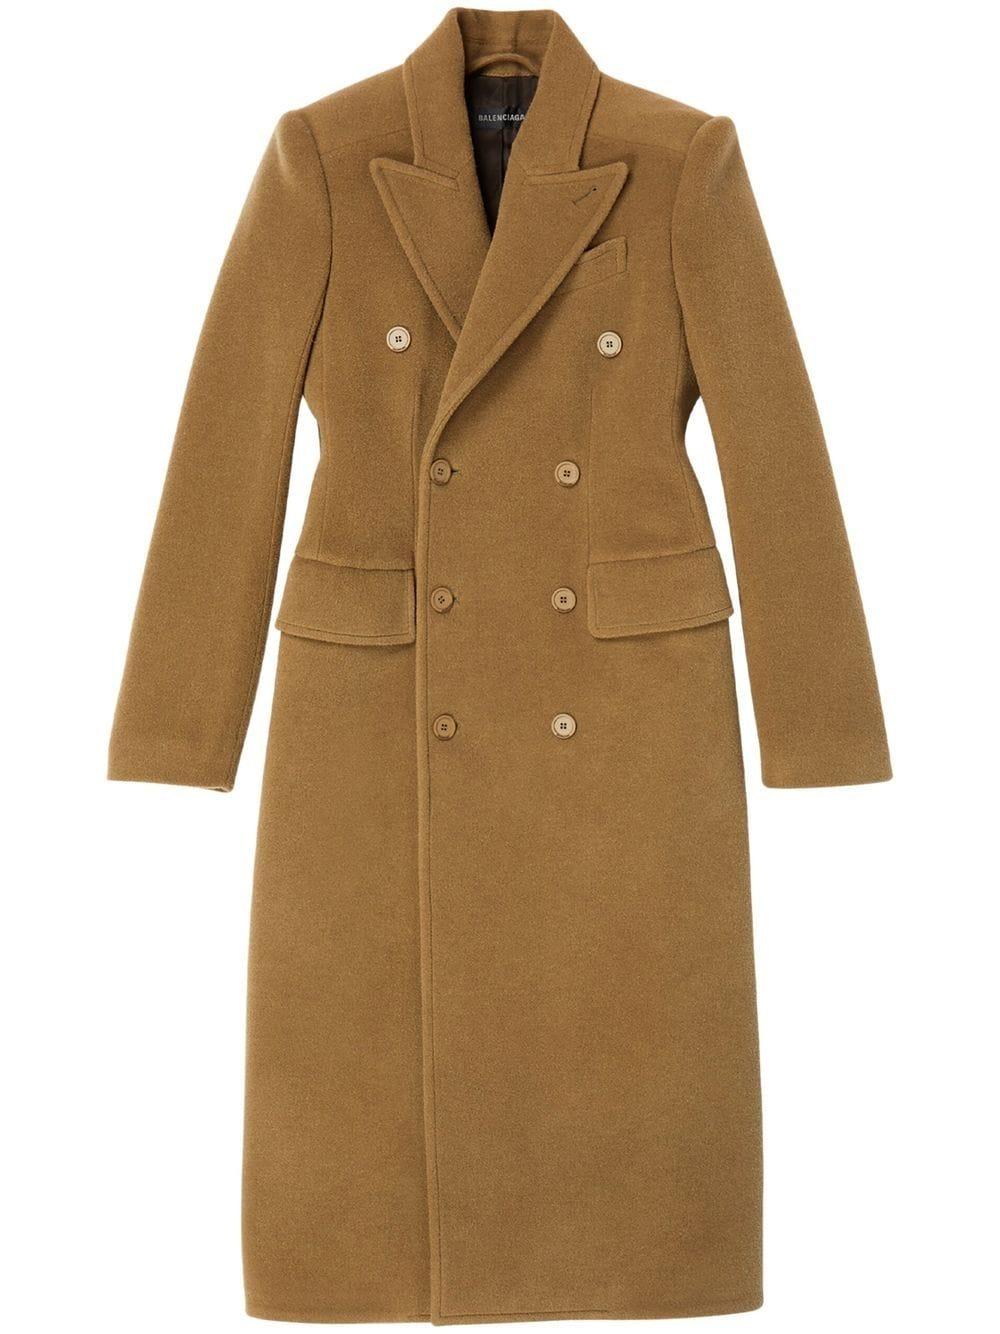 Balenciaga Hourglass Double-breasted Coat in Natural | Lyst